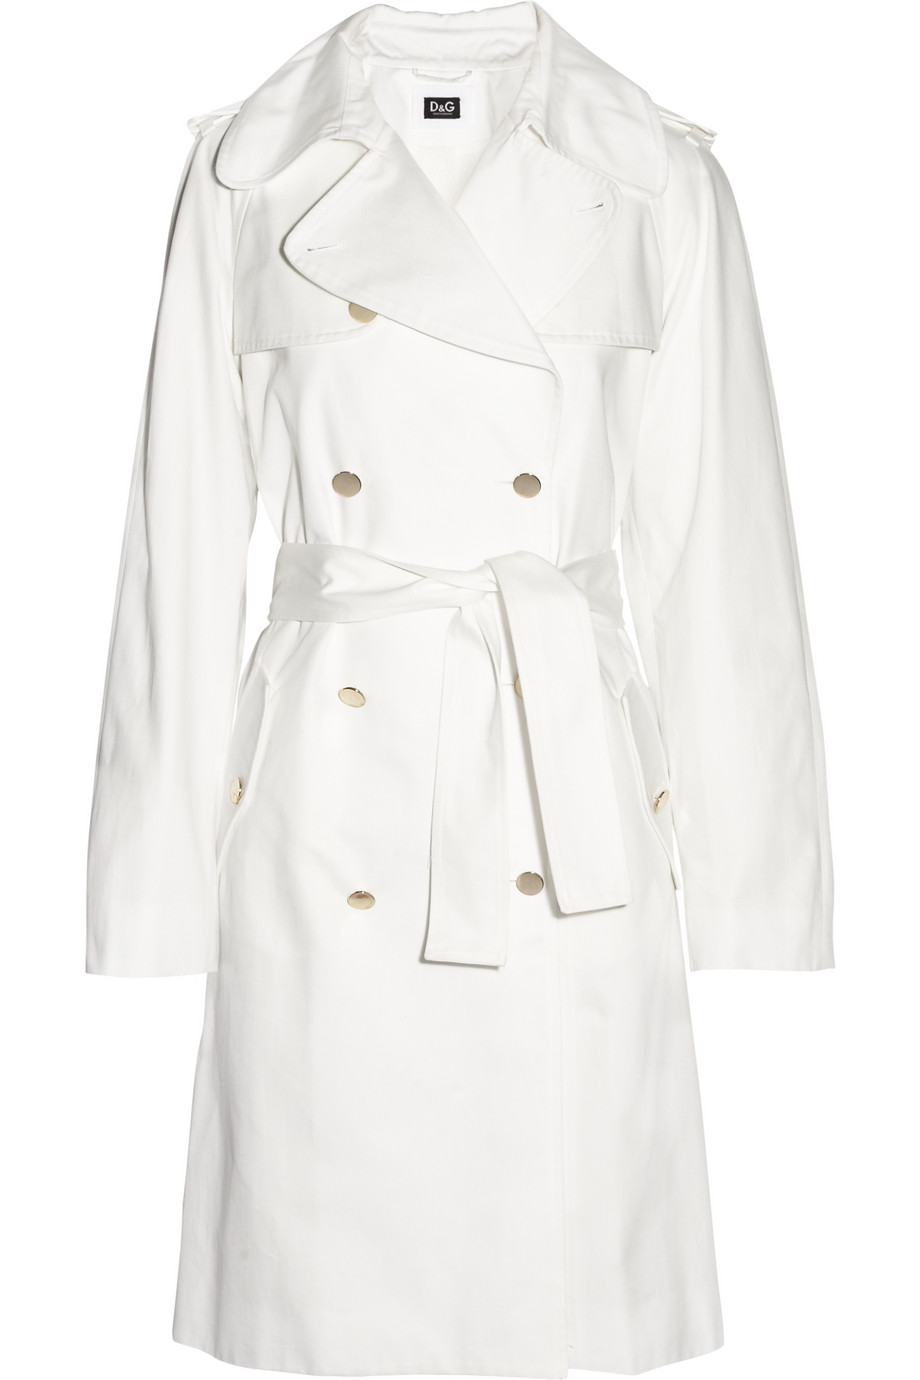 Lyst - Dolce & Gabbana Cotton Twill Trench Coat in White